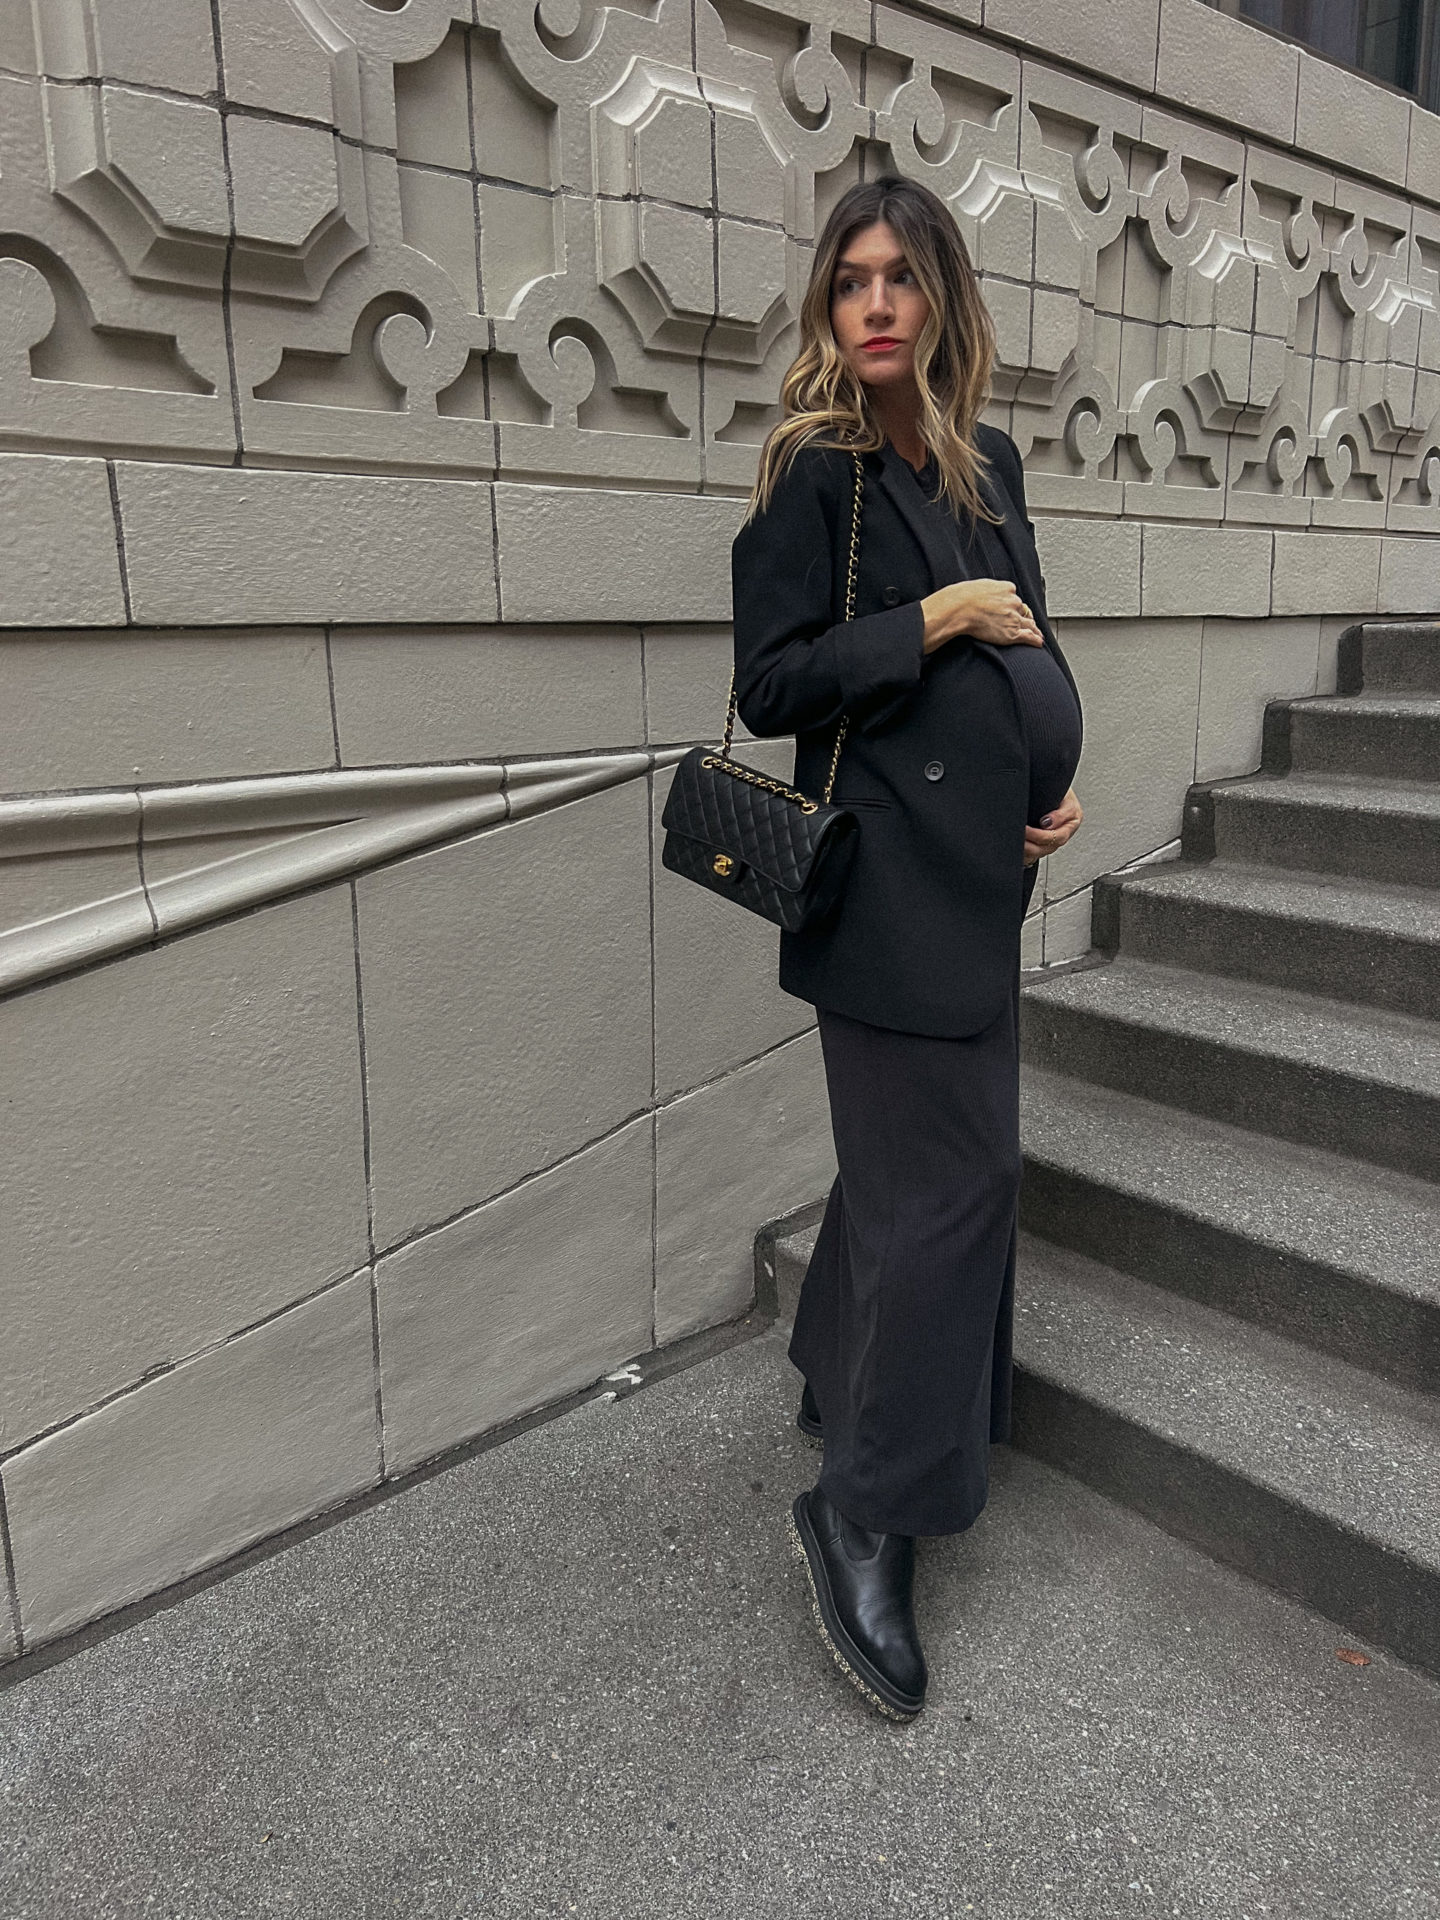 the grey edit - cortney bigelow - wednesday addams style - all black outfit - nine months pregnant - chanel classic flap bag